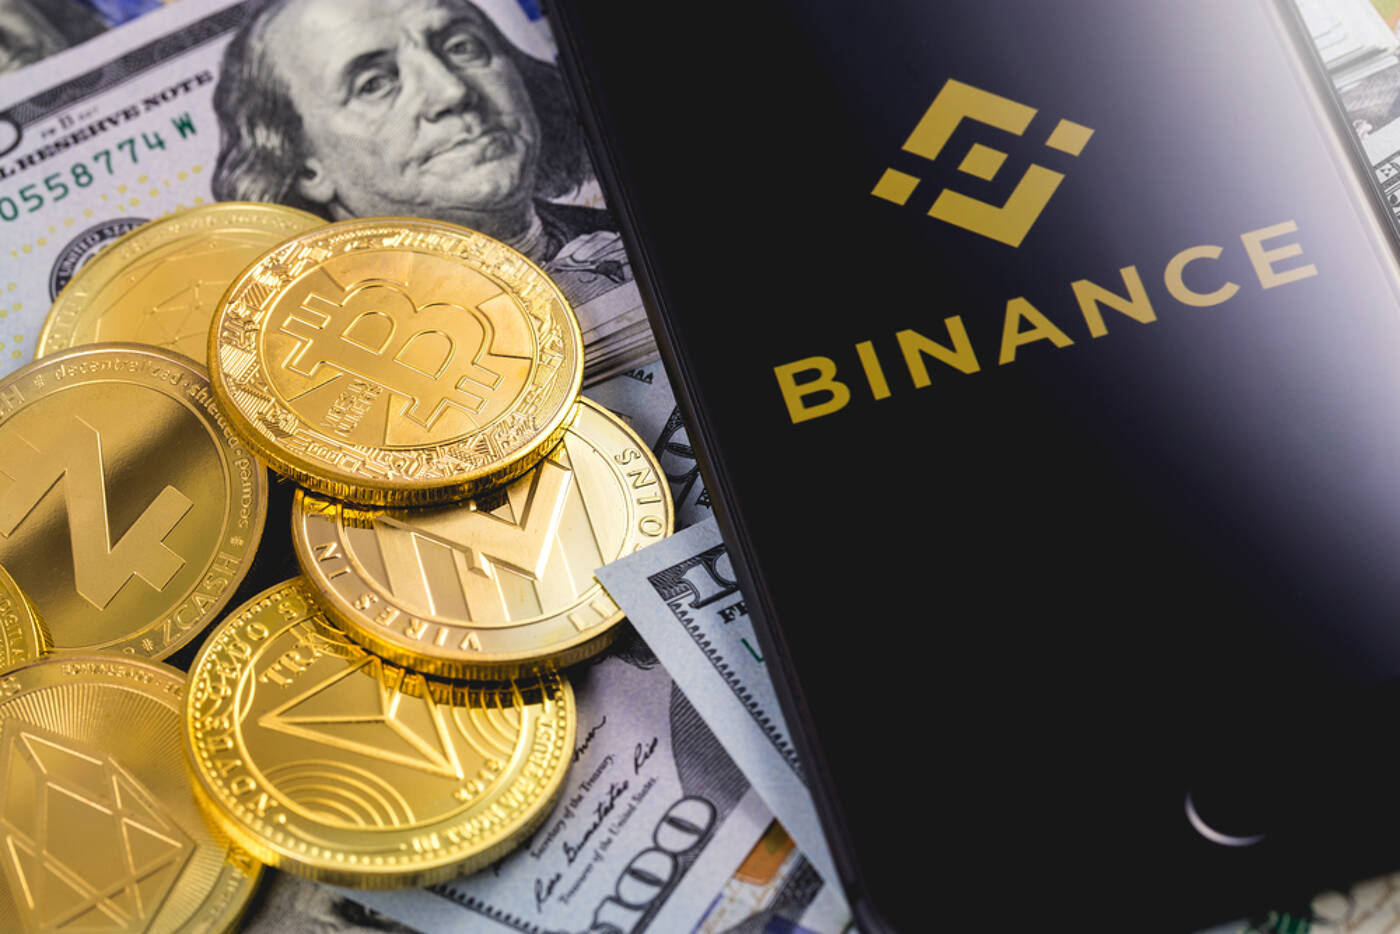 Binance Increases Crypto Trading Option With Turkish Lira, Adds 11 Other Trading Pairs